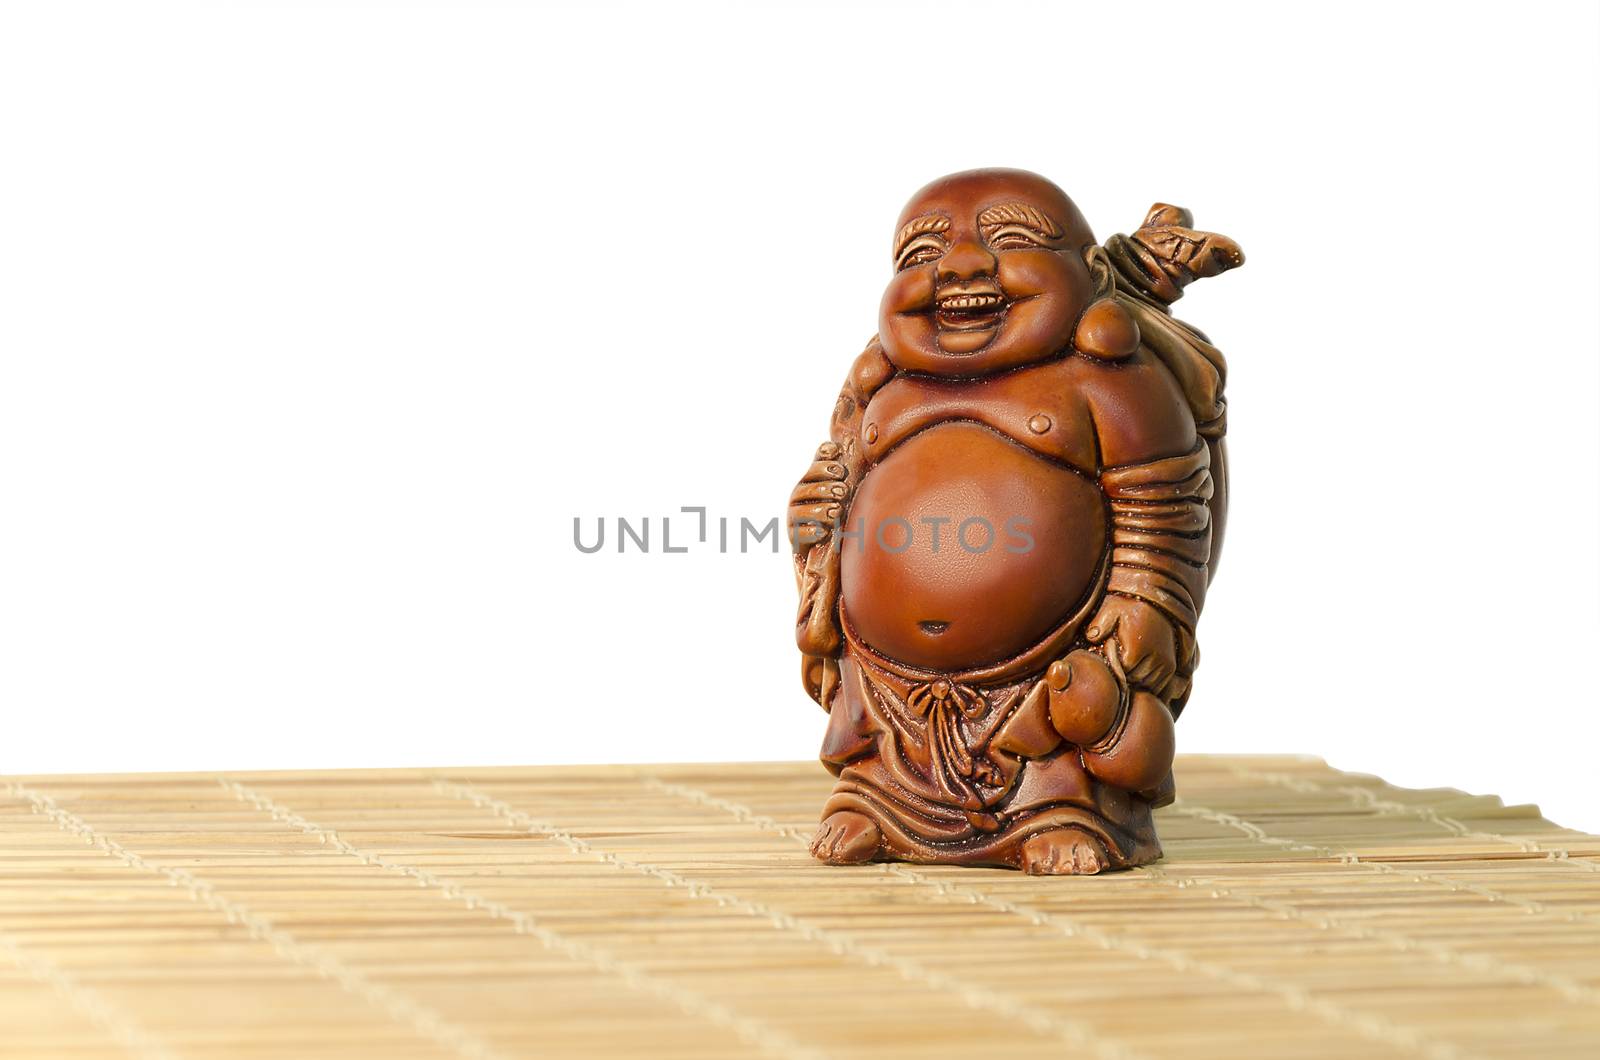 Statuette Hotei or the Laughing Buddha - the God of Wealth, joy and prosperity on a white background.